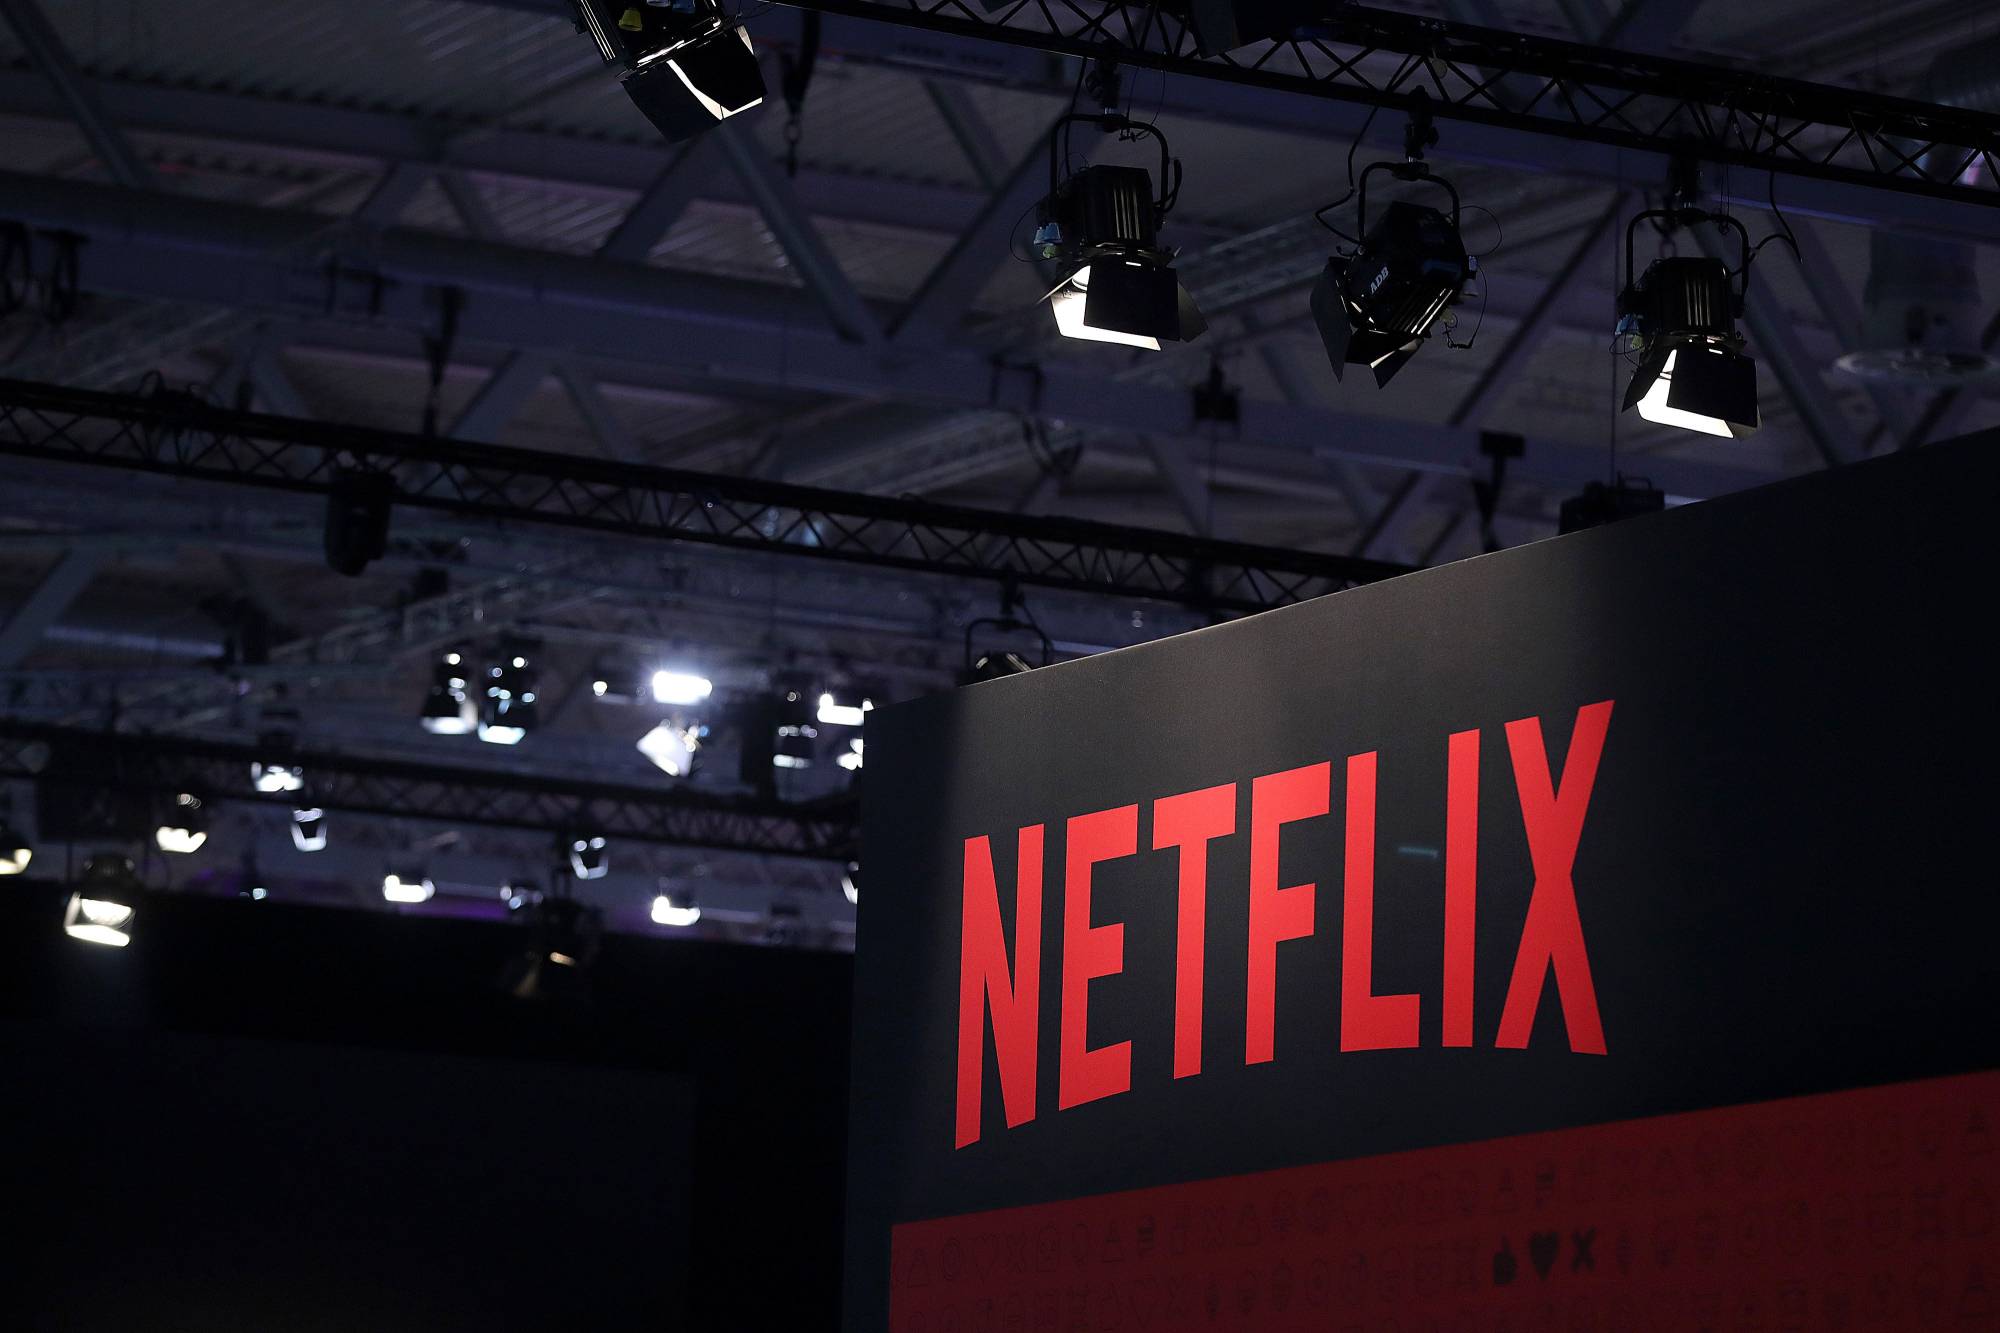 Netflix Inc. plans on nearly doubling its number of anime releases this year to attract Asian viewers. | BLOOMBERG